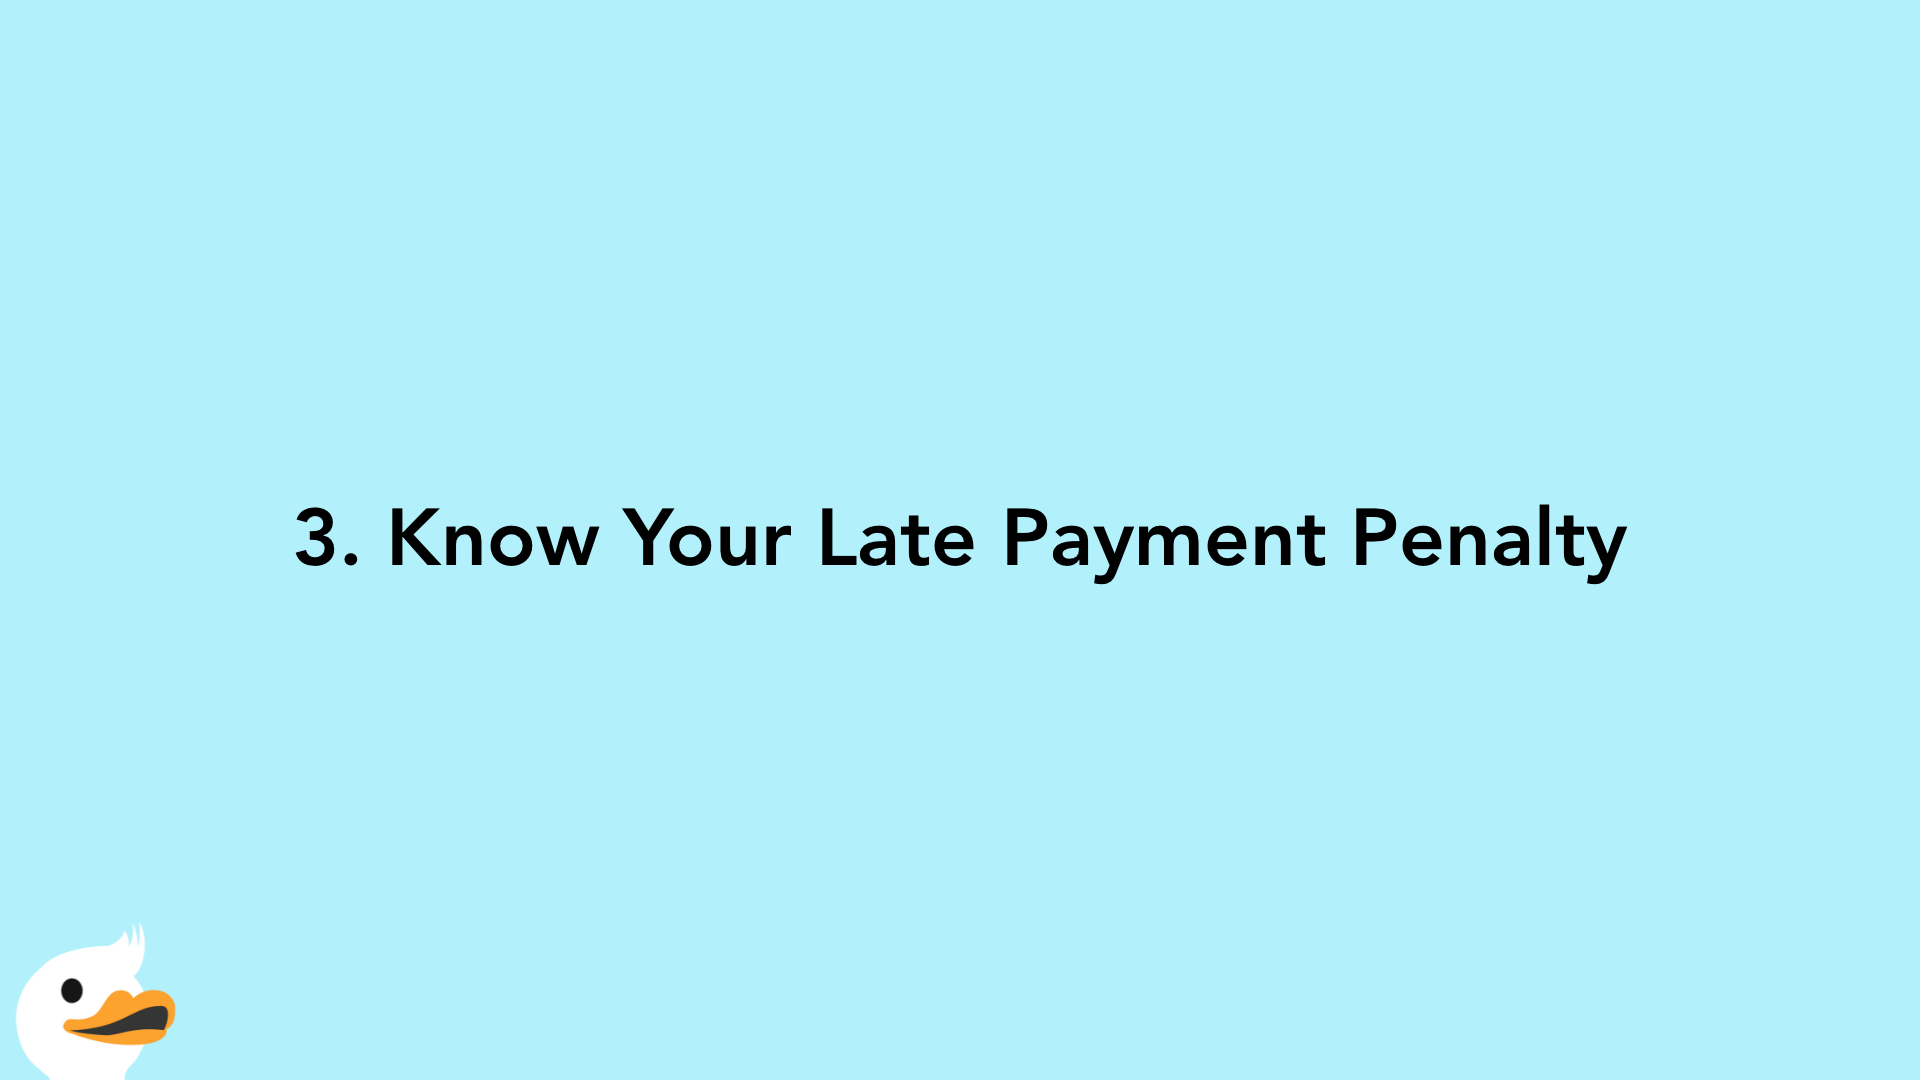 3. Know Your Late Payment Penalty